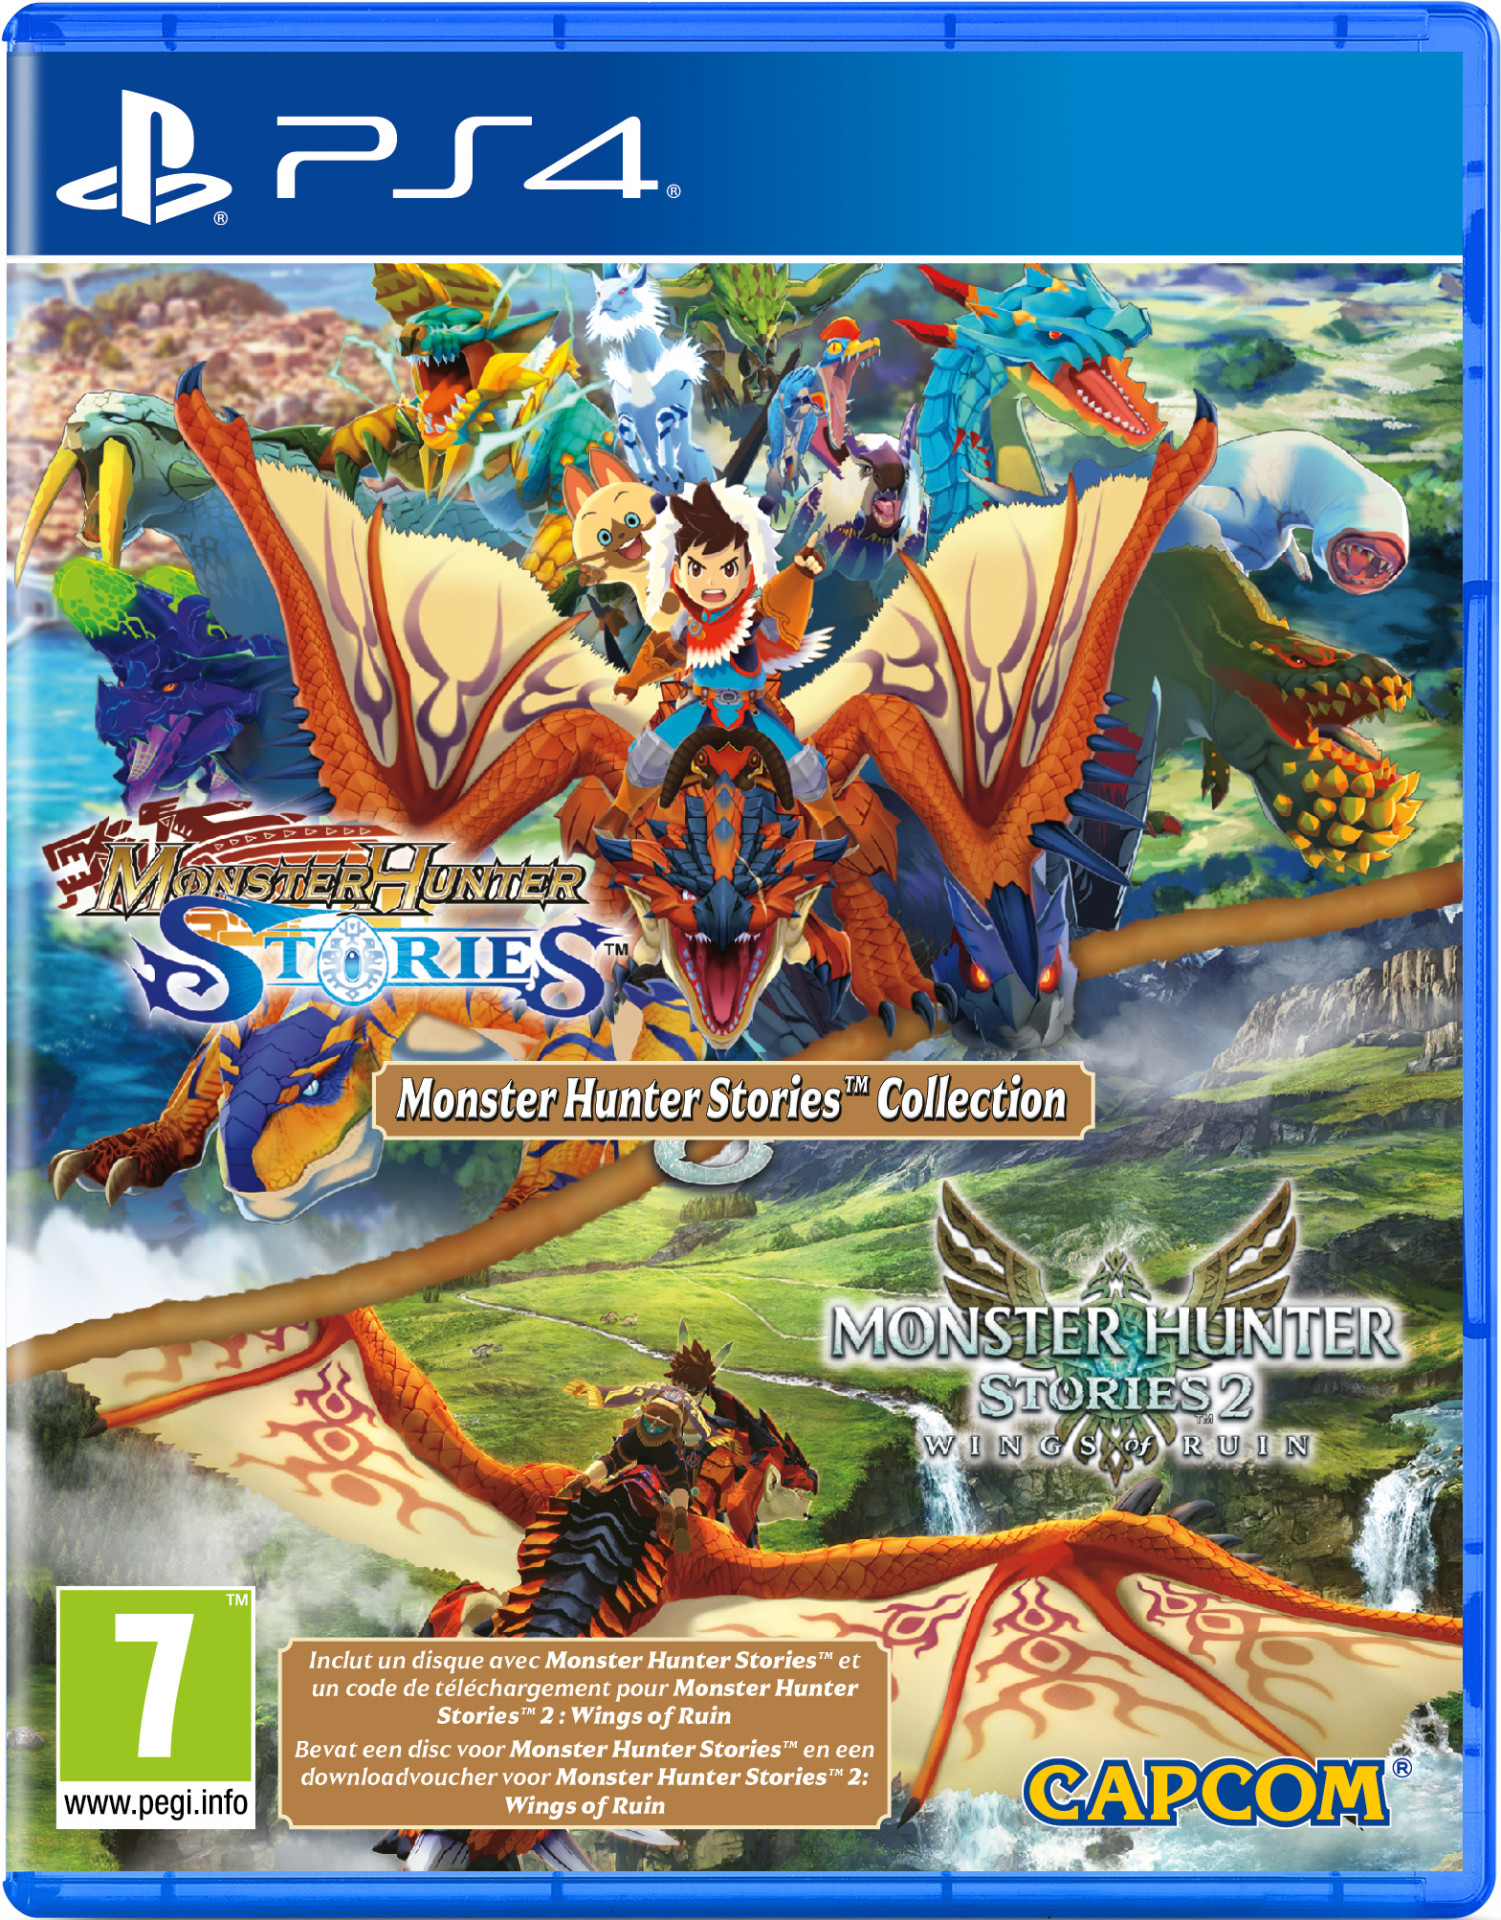 Capcom Monster Hunter Stories 1 & 2 Collection